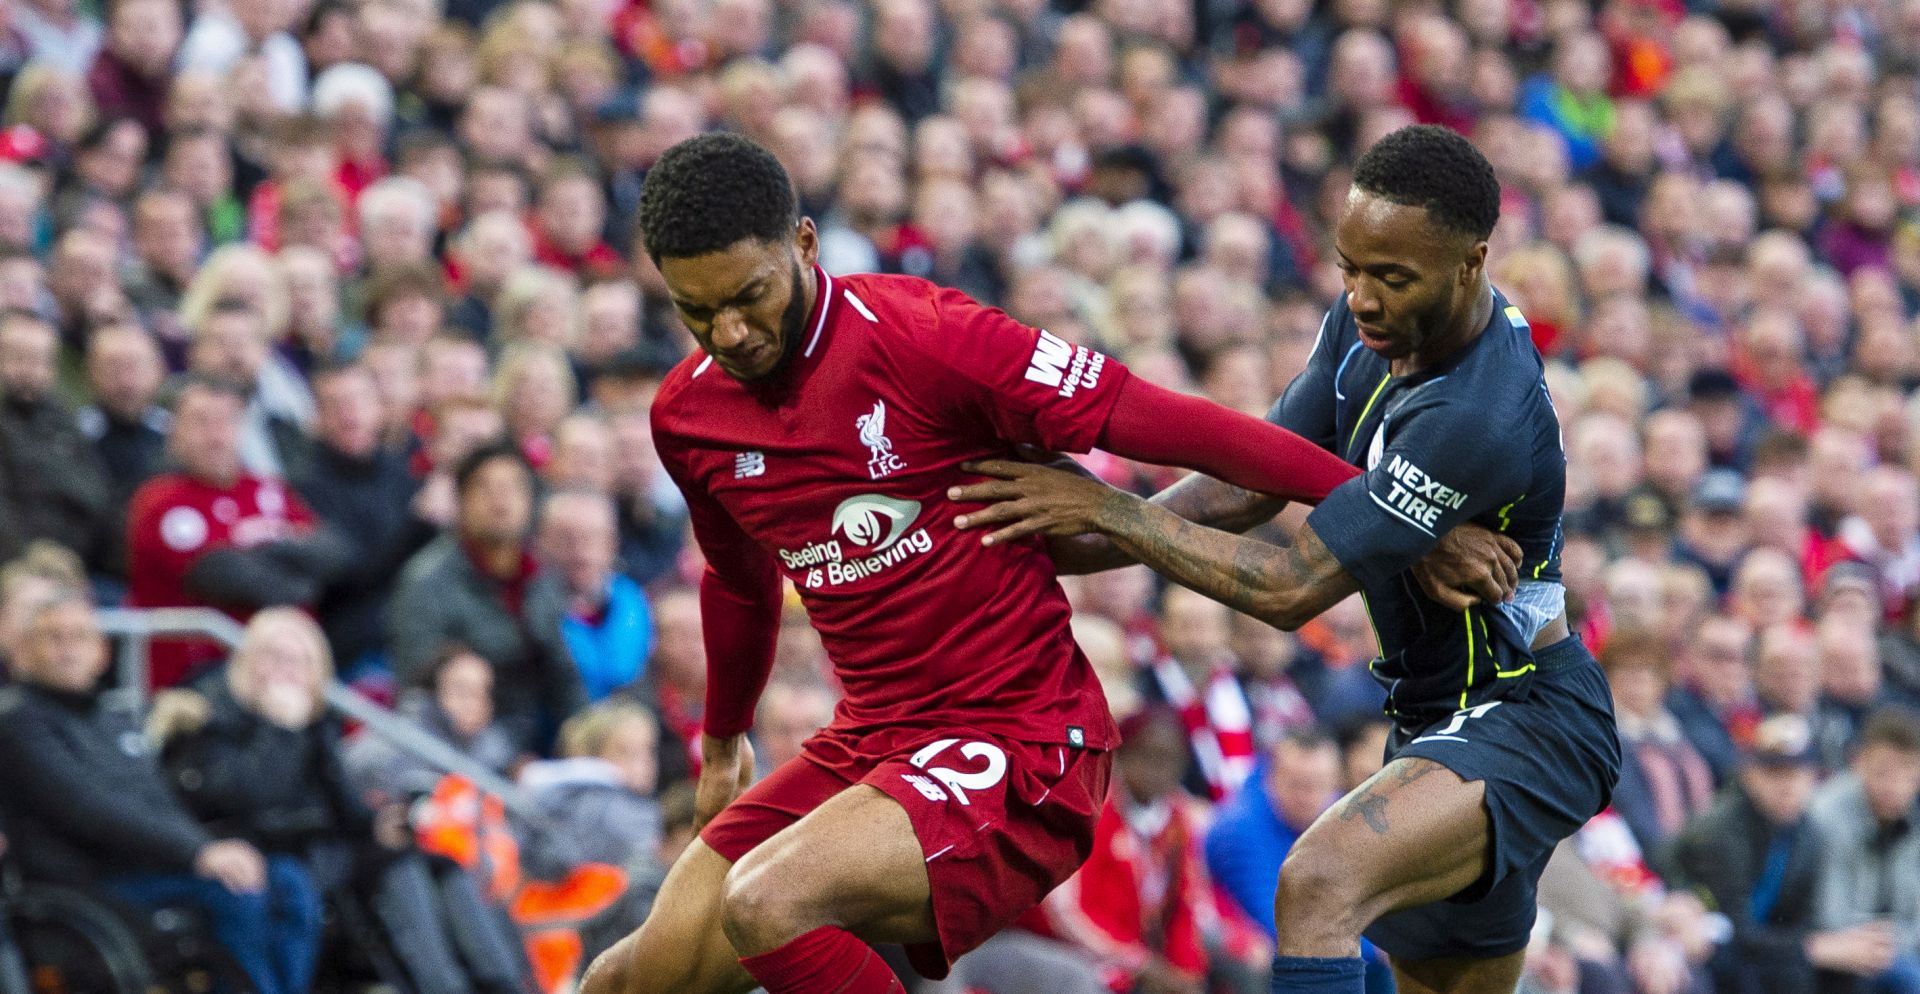 epa07990905 (FILE) - Liverpool's Joe Gomez (L) in action against Manchester City's Raheem Sterling (R) during the English Premier League soccer match between Liverpool FC and Manchester City at Anfield in Liverpool, Britain, 07 October 2018 (re-issued 12 November 2019). The England national soccer team dropped Raheem Sterling following a clash with teammate Joe Gomez at the England camp, British media reports claimed on 12 November 2019.  EPA/PETER POWELL EDITORIAL USE ONLY. No use with unauthorized audio, video, data, fixture lists, club/league logos or 'live' services. Online in-match use limited to 75 images, no video emulation. No use in betting, games or single club/league/player publications *** Local Caption *** 54684121